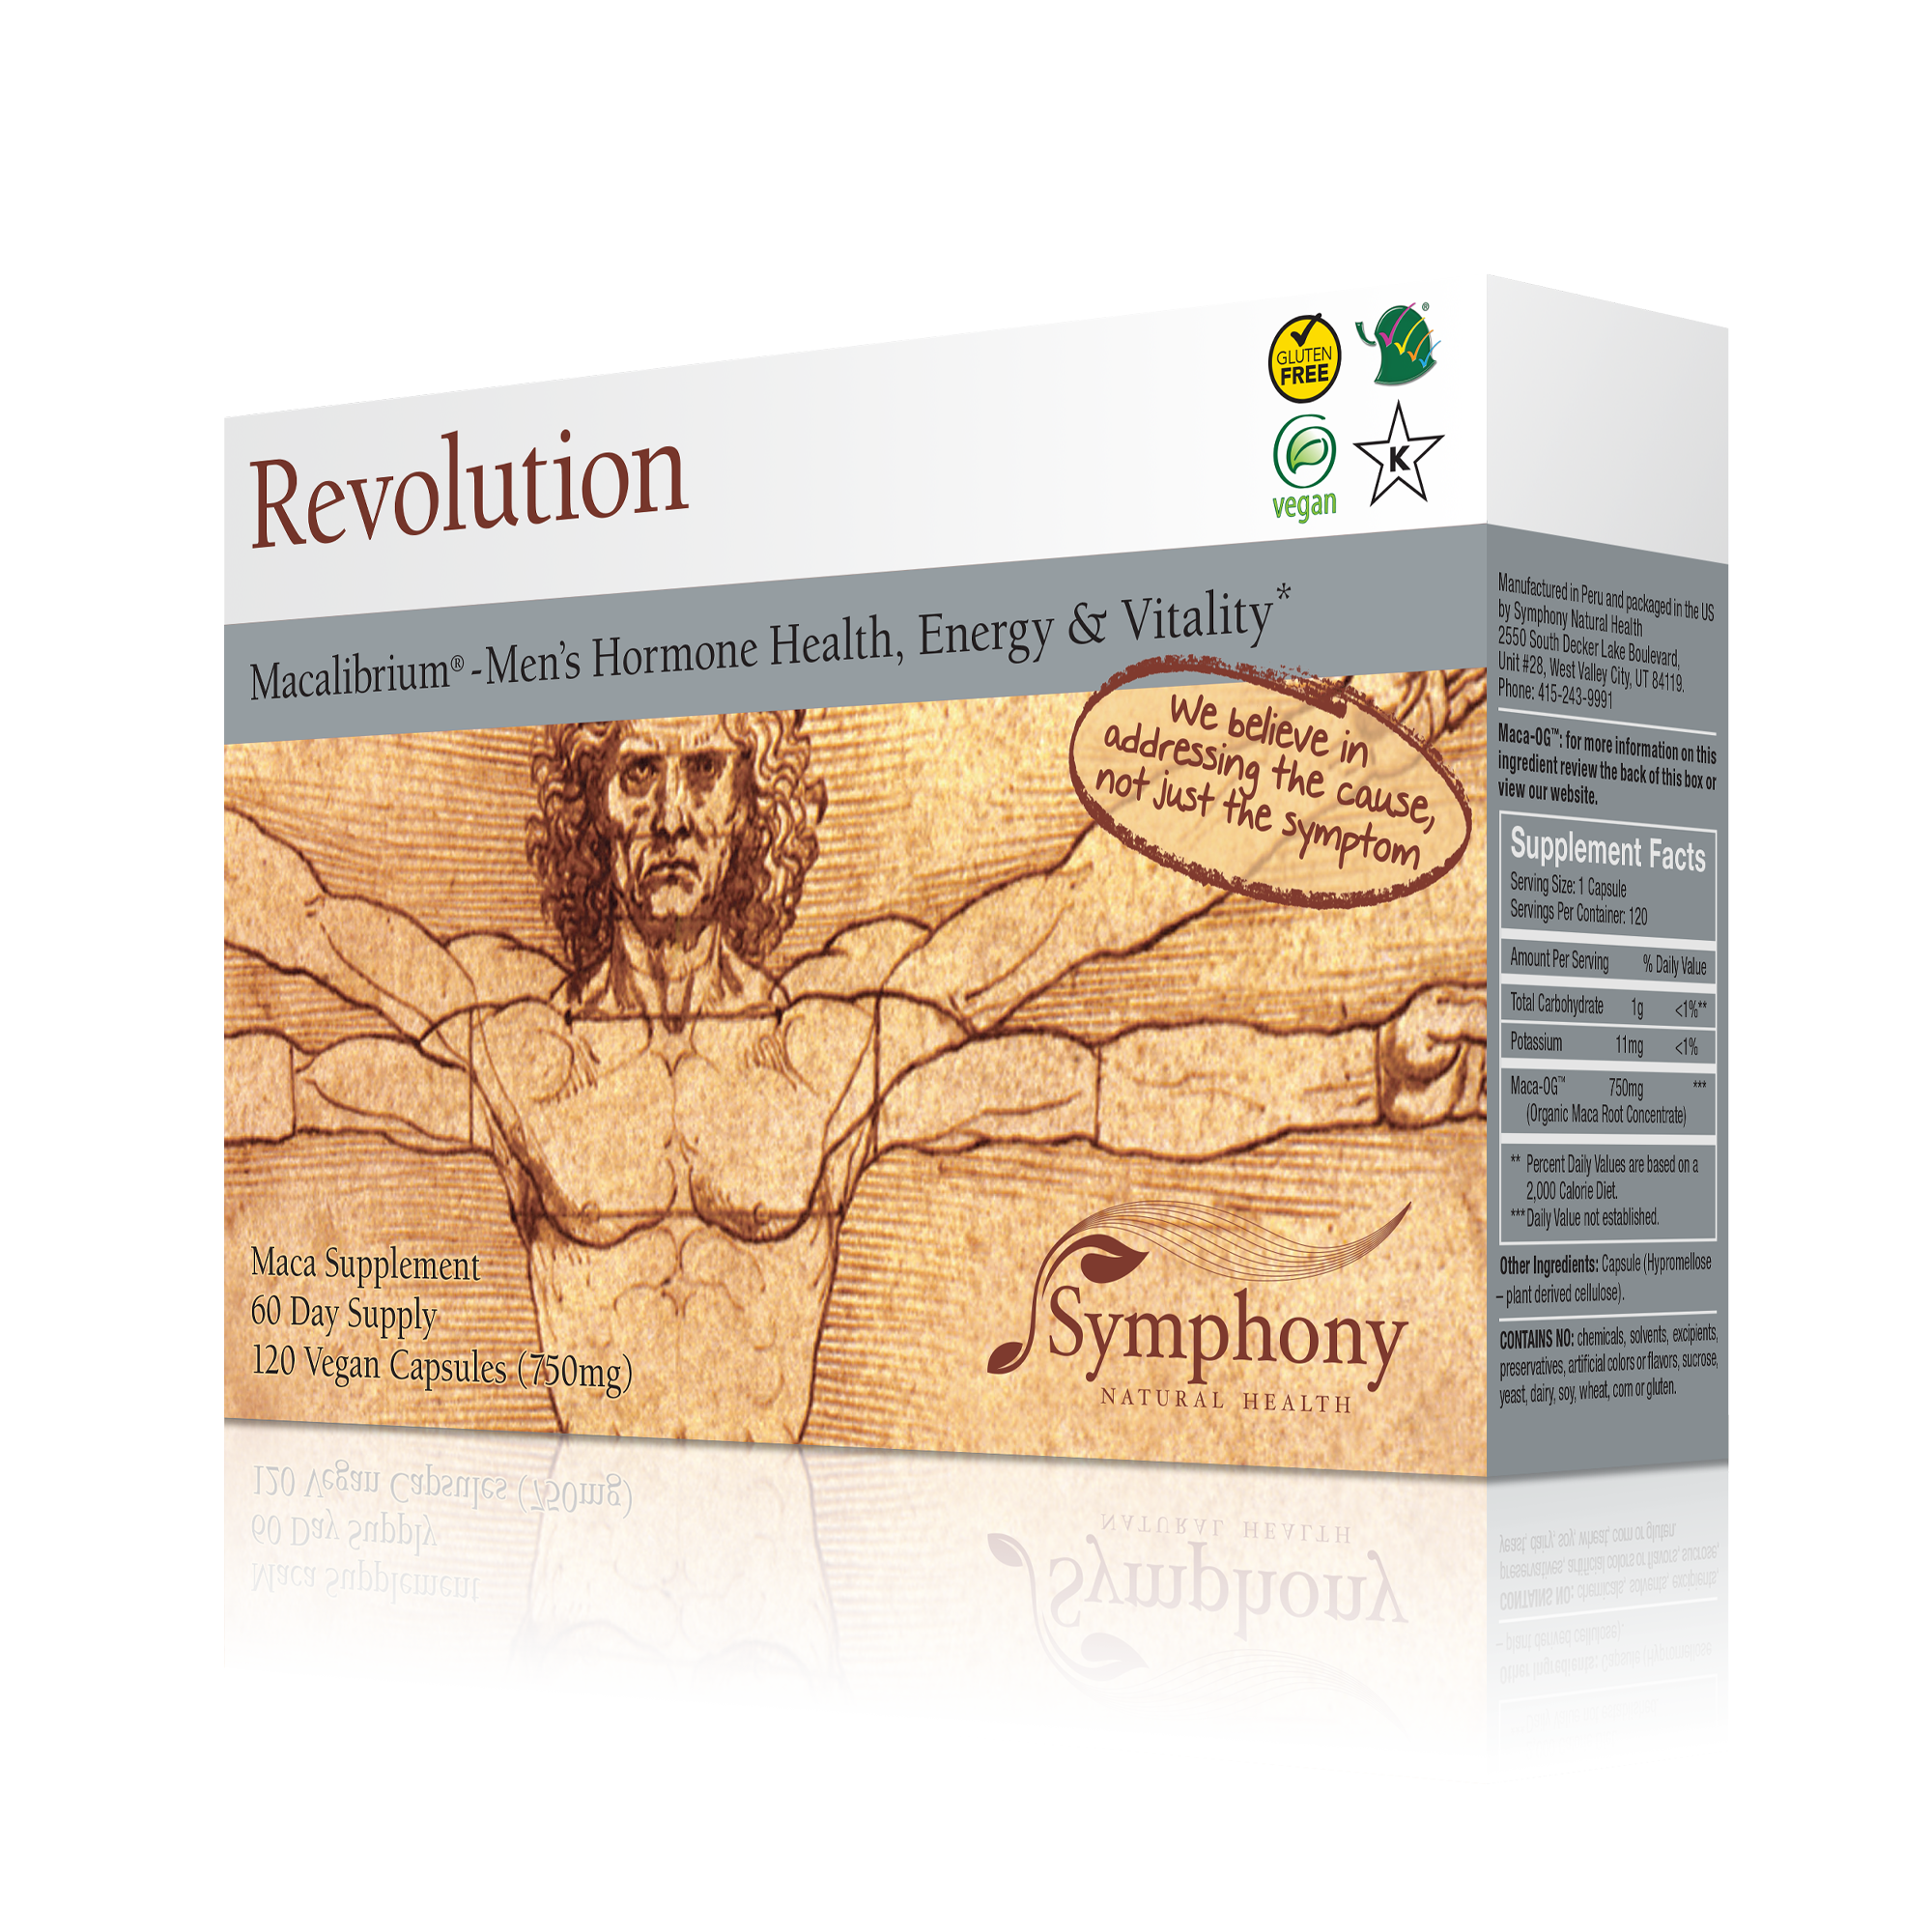 Revolution Macalibrium left-facing product box with Vitruvian Man illustration, we believe in addressing the cause not just the symptom, vegan, gluten free, Kosher, on black background